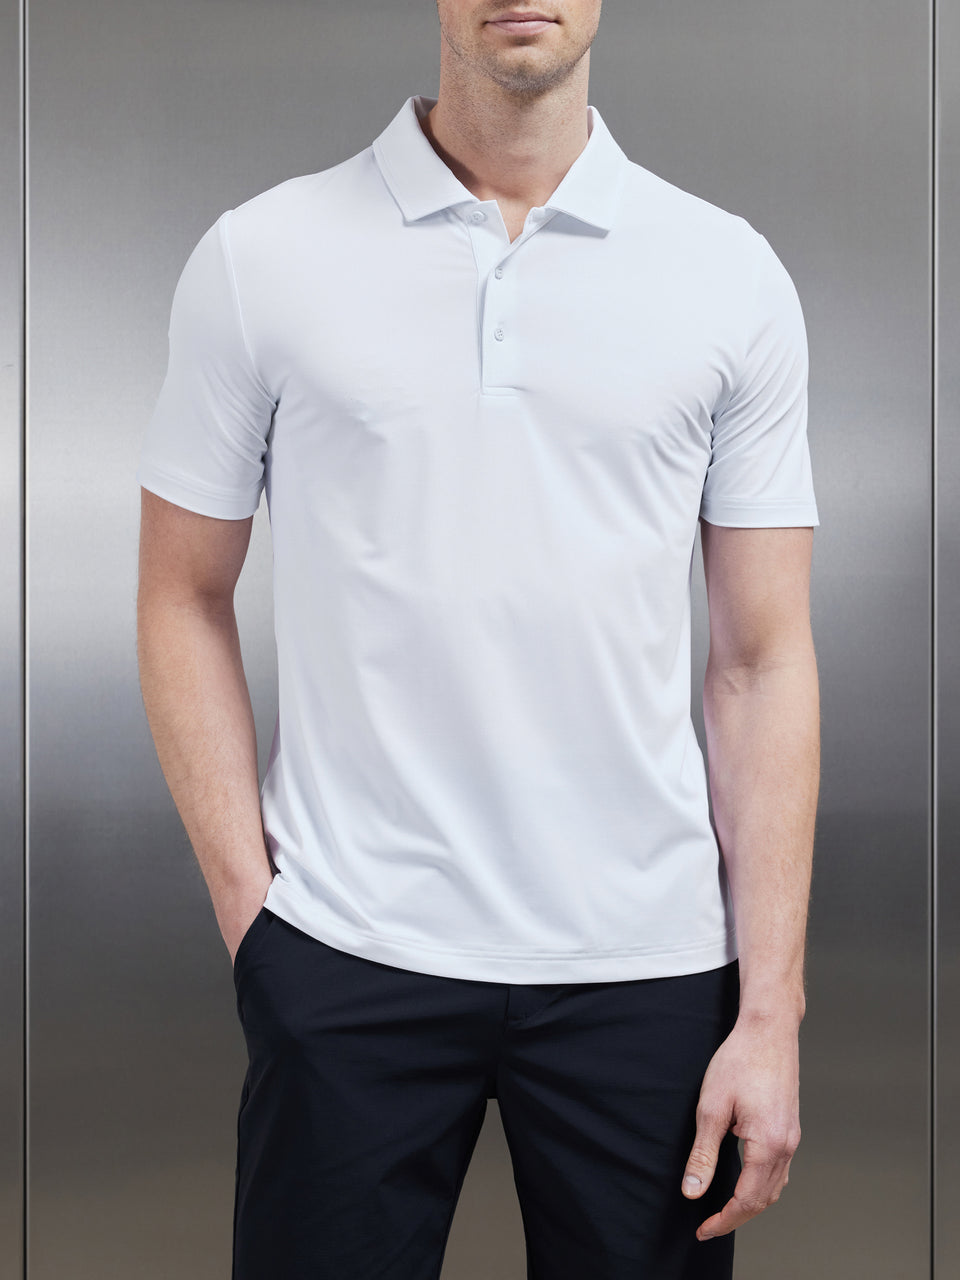 Technical Polo Shirt in White